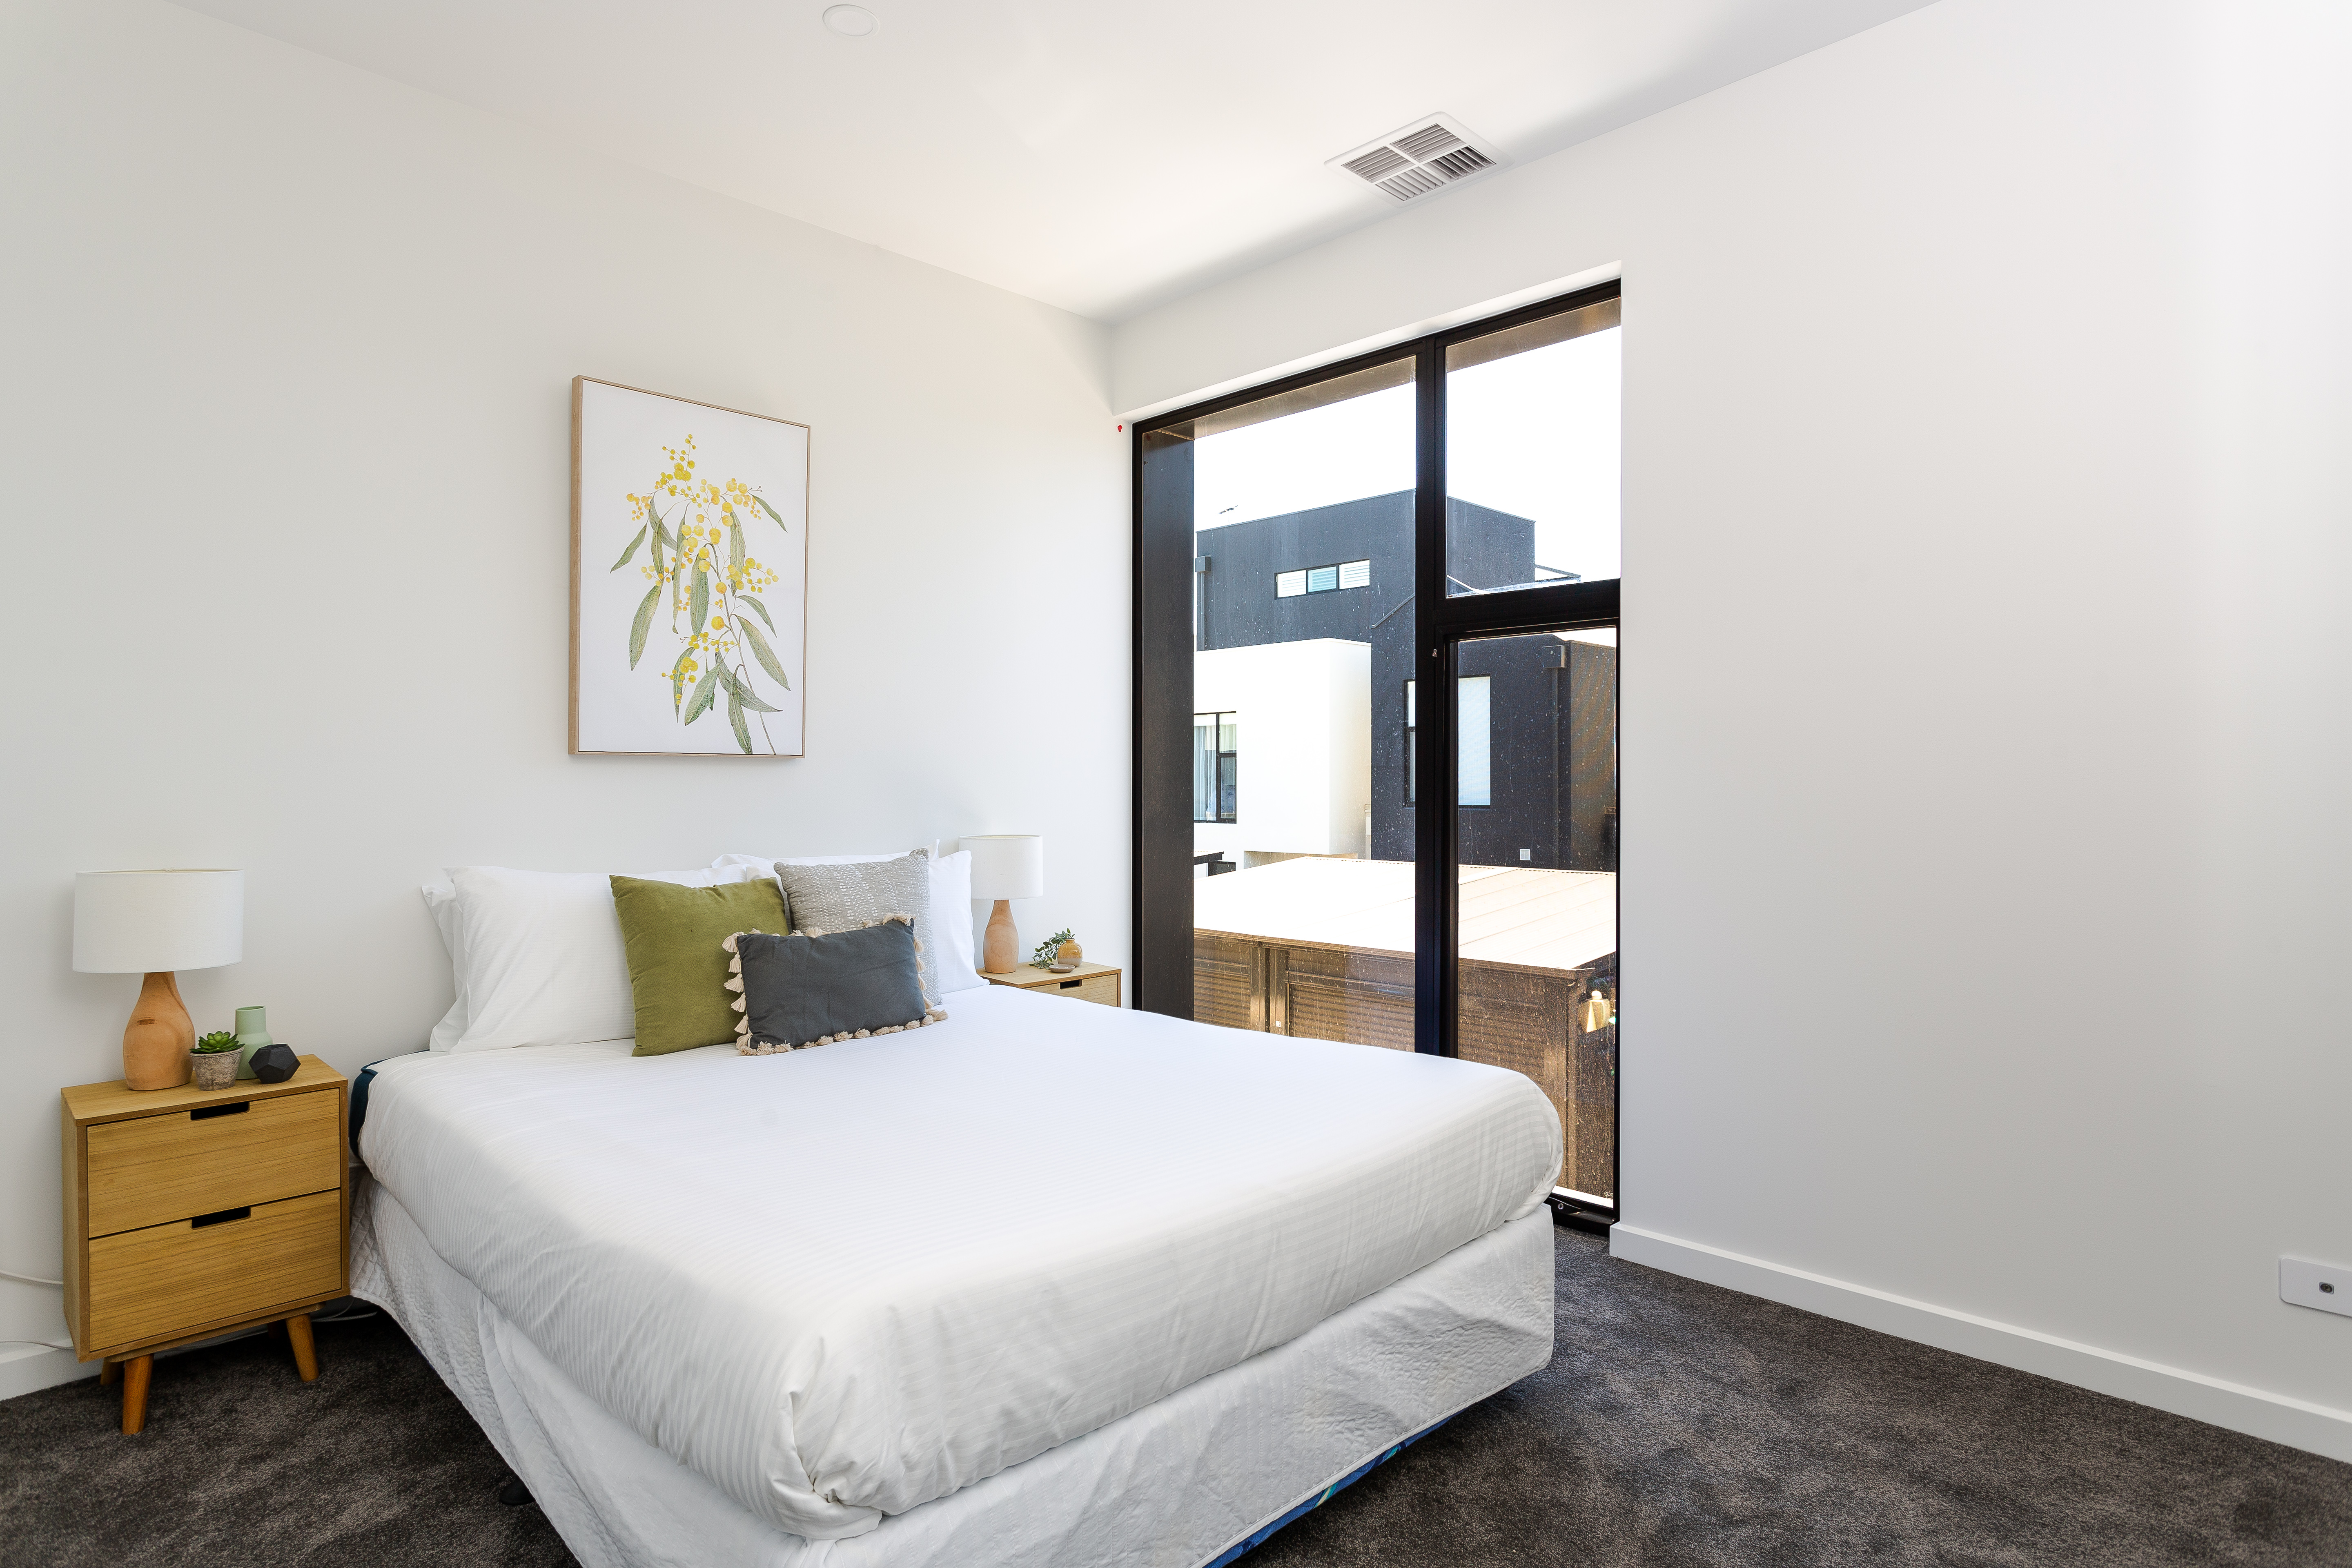 Bedroom 2 - Two Bedroom Apartment - Urban Rest - Albany Lane Apartments - Adelaide